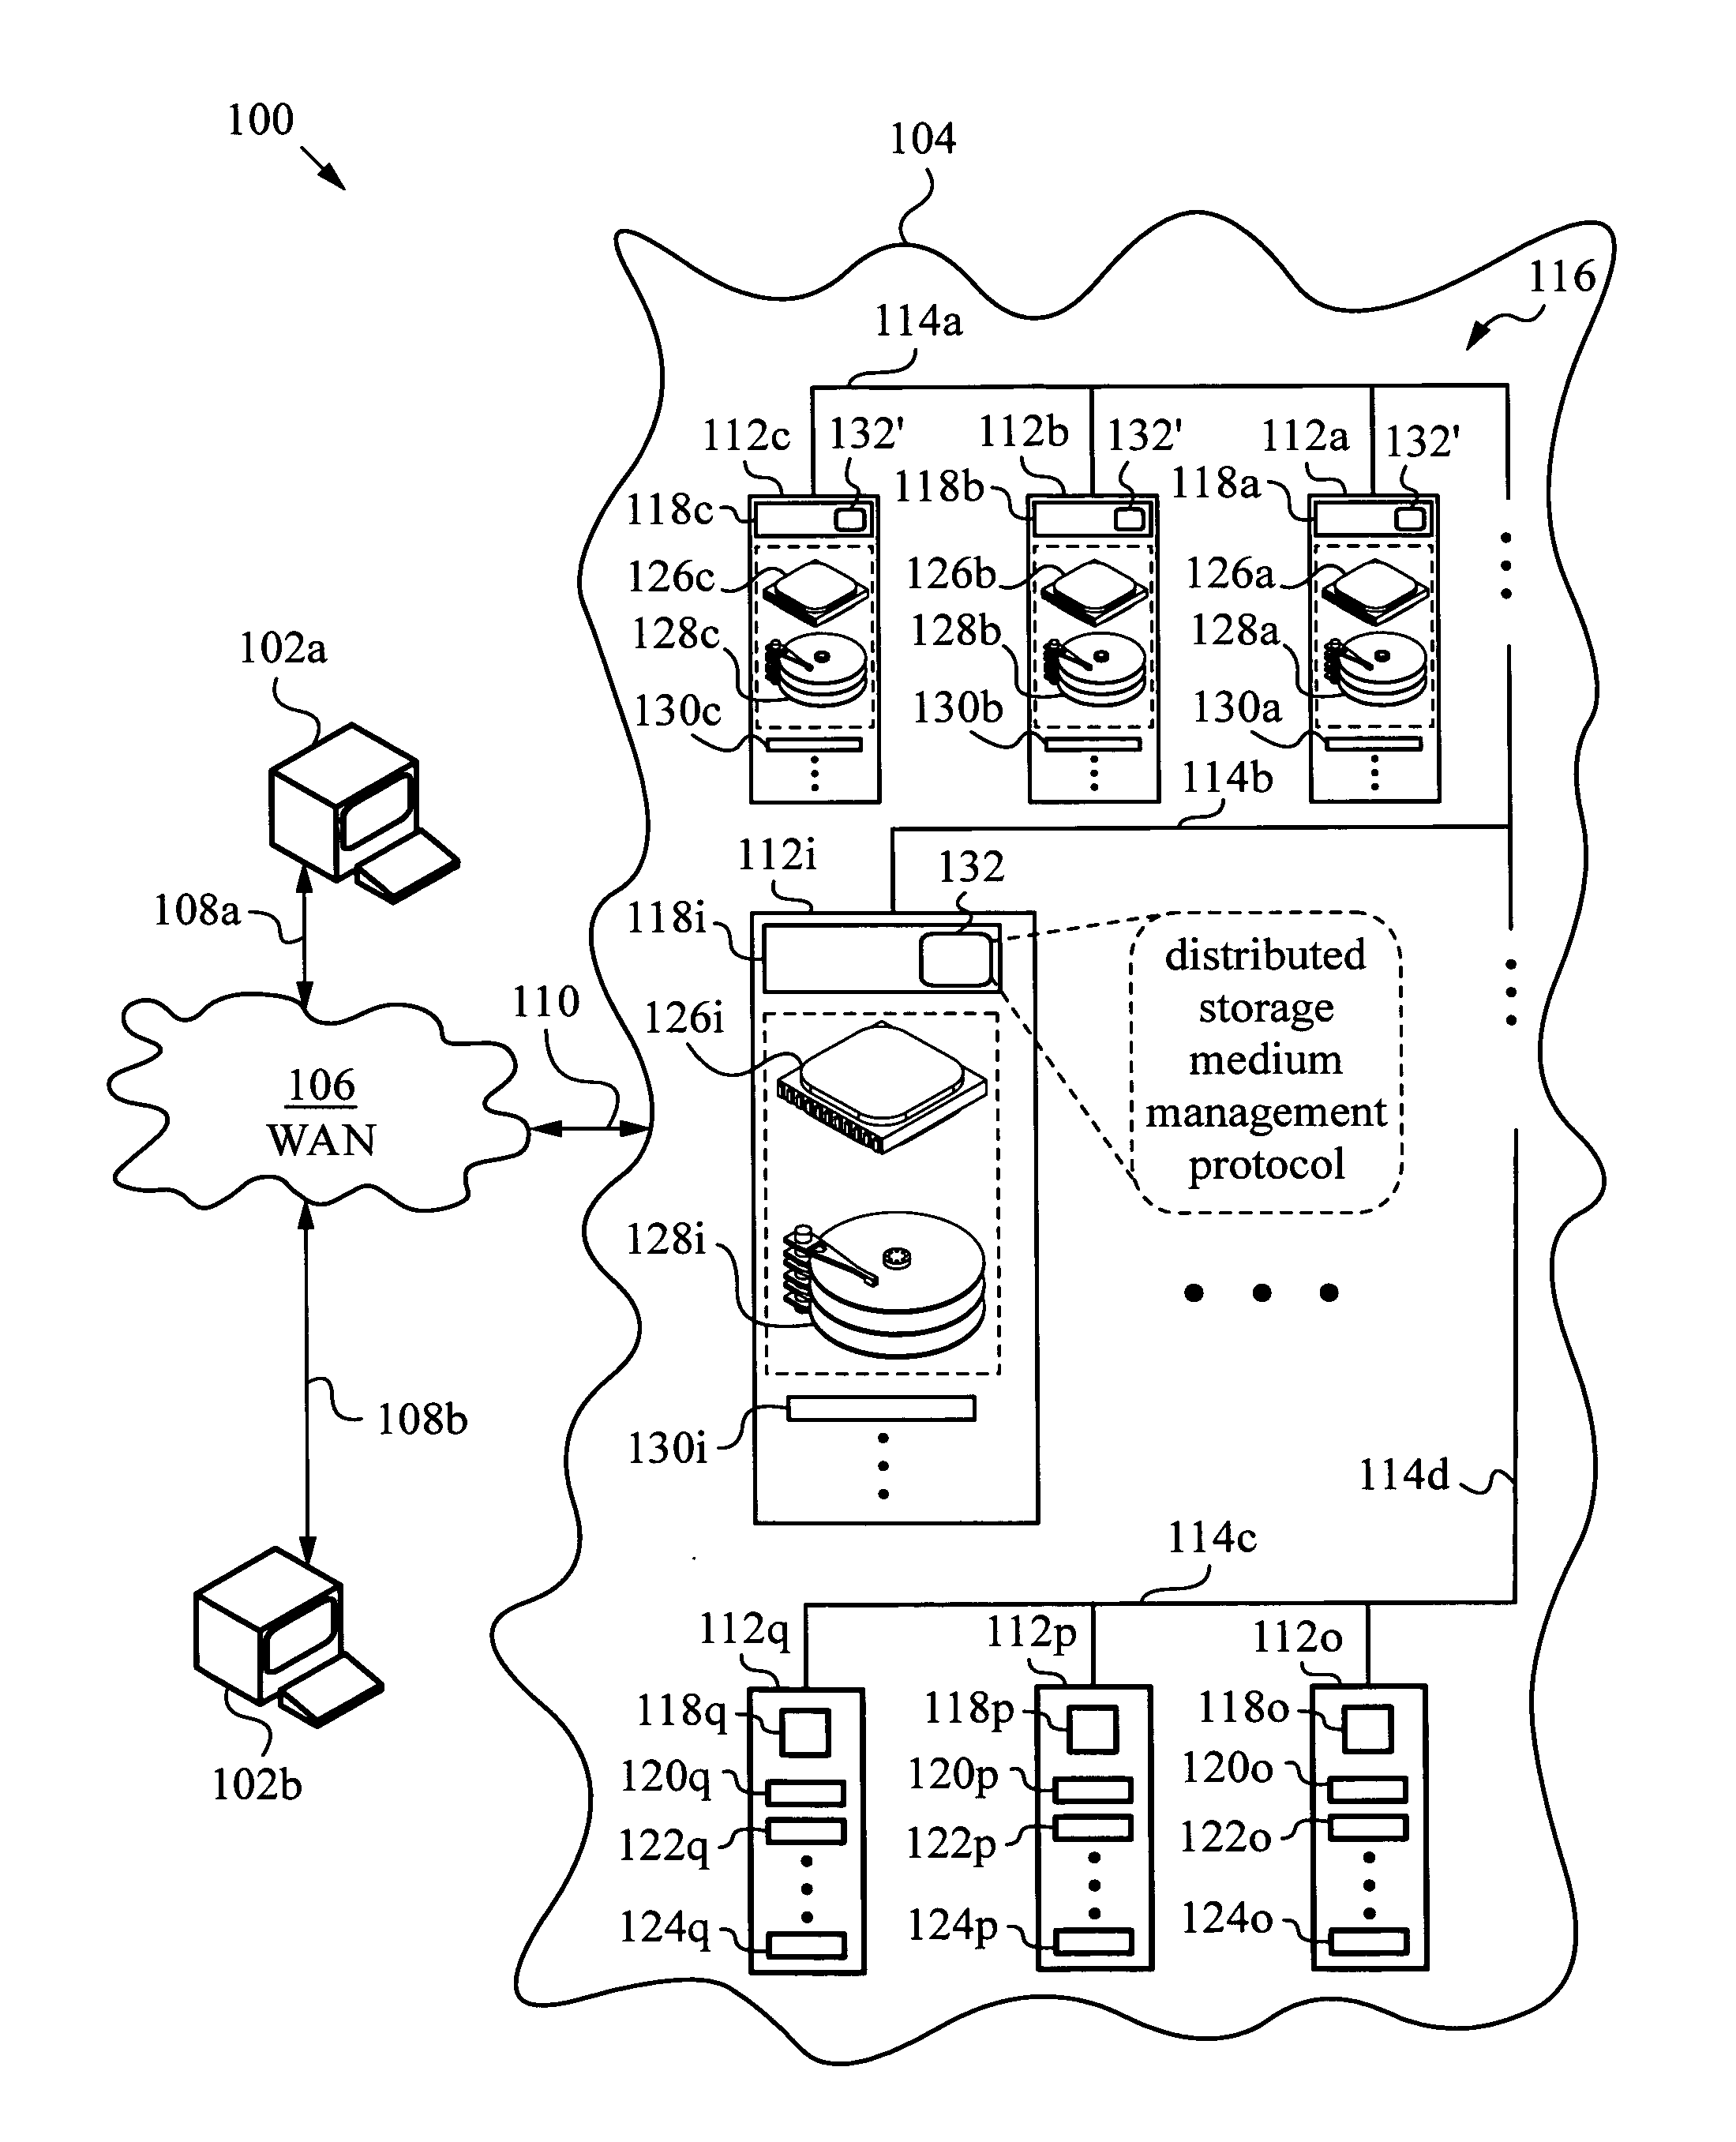 Distributed storage medium management for heterogeneous storage media in high availability clusters